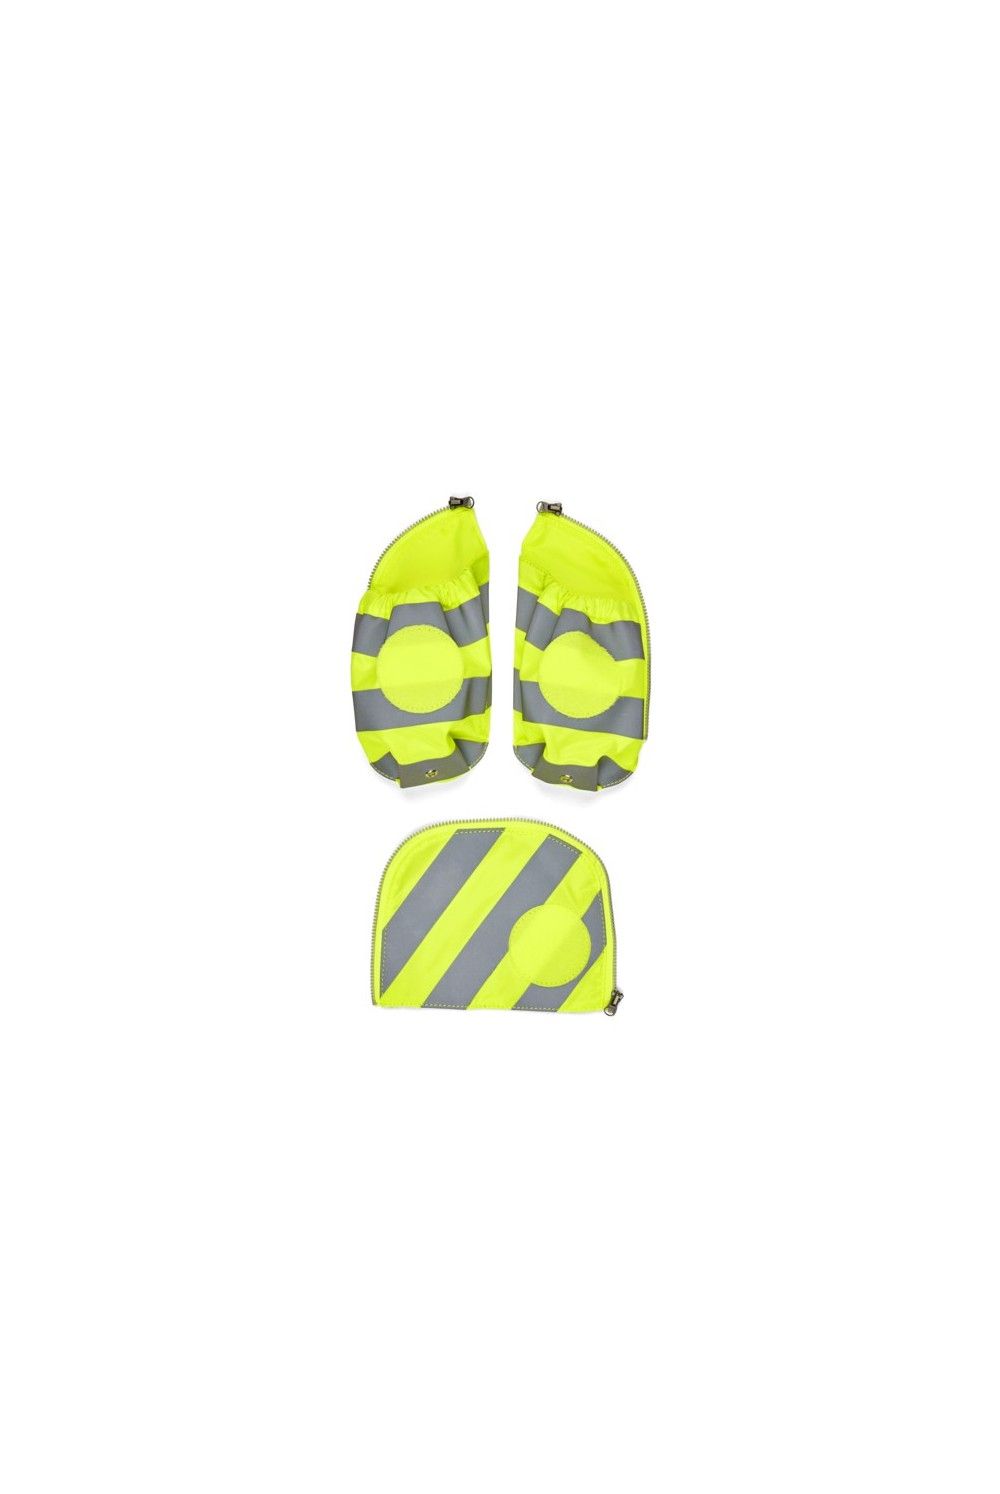 ergobag safety set side pocket with reflector yellow